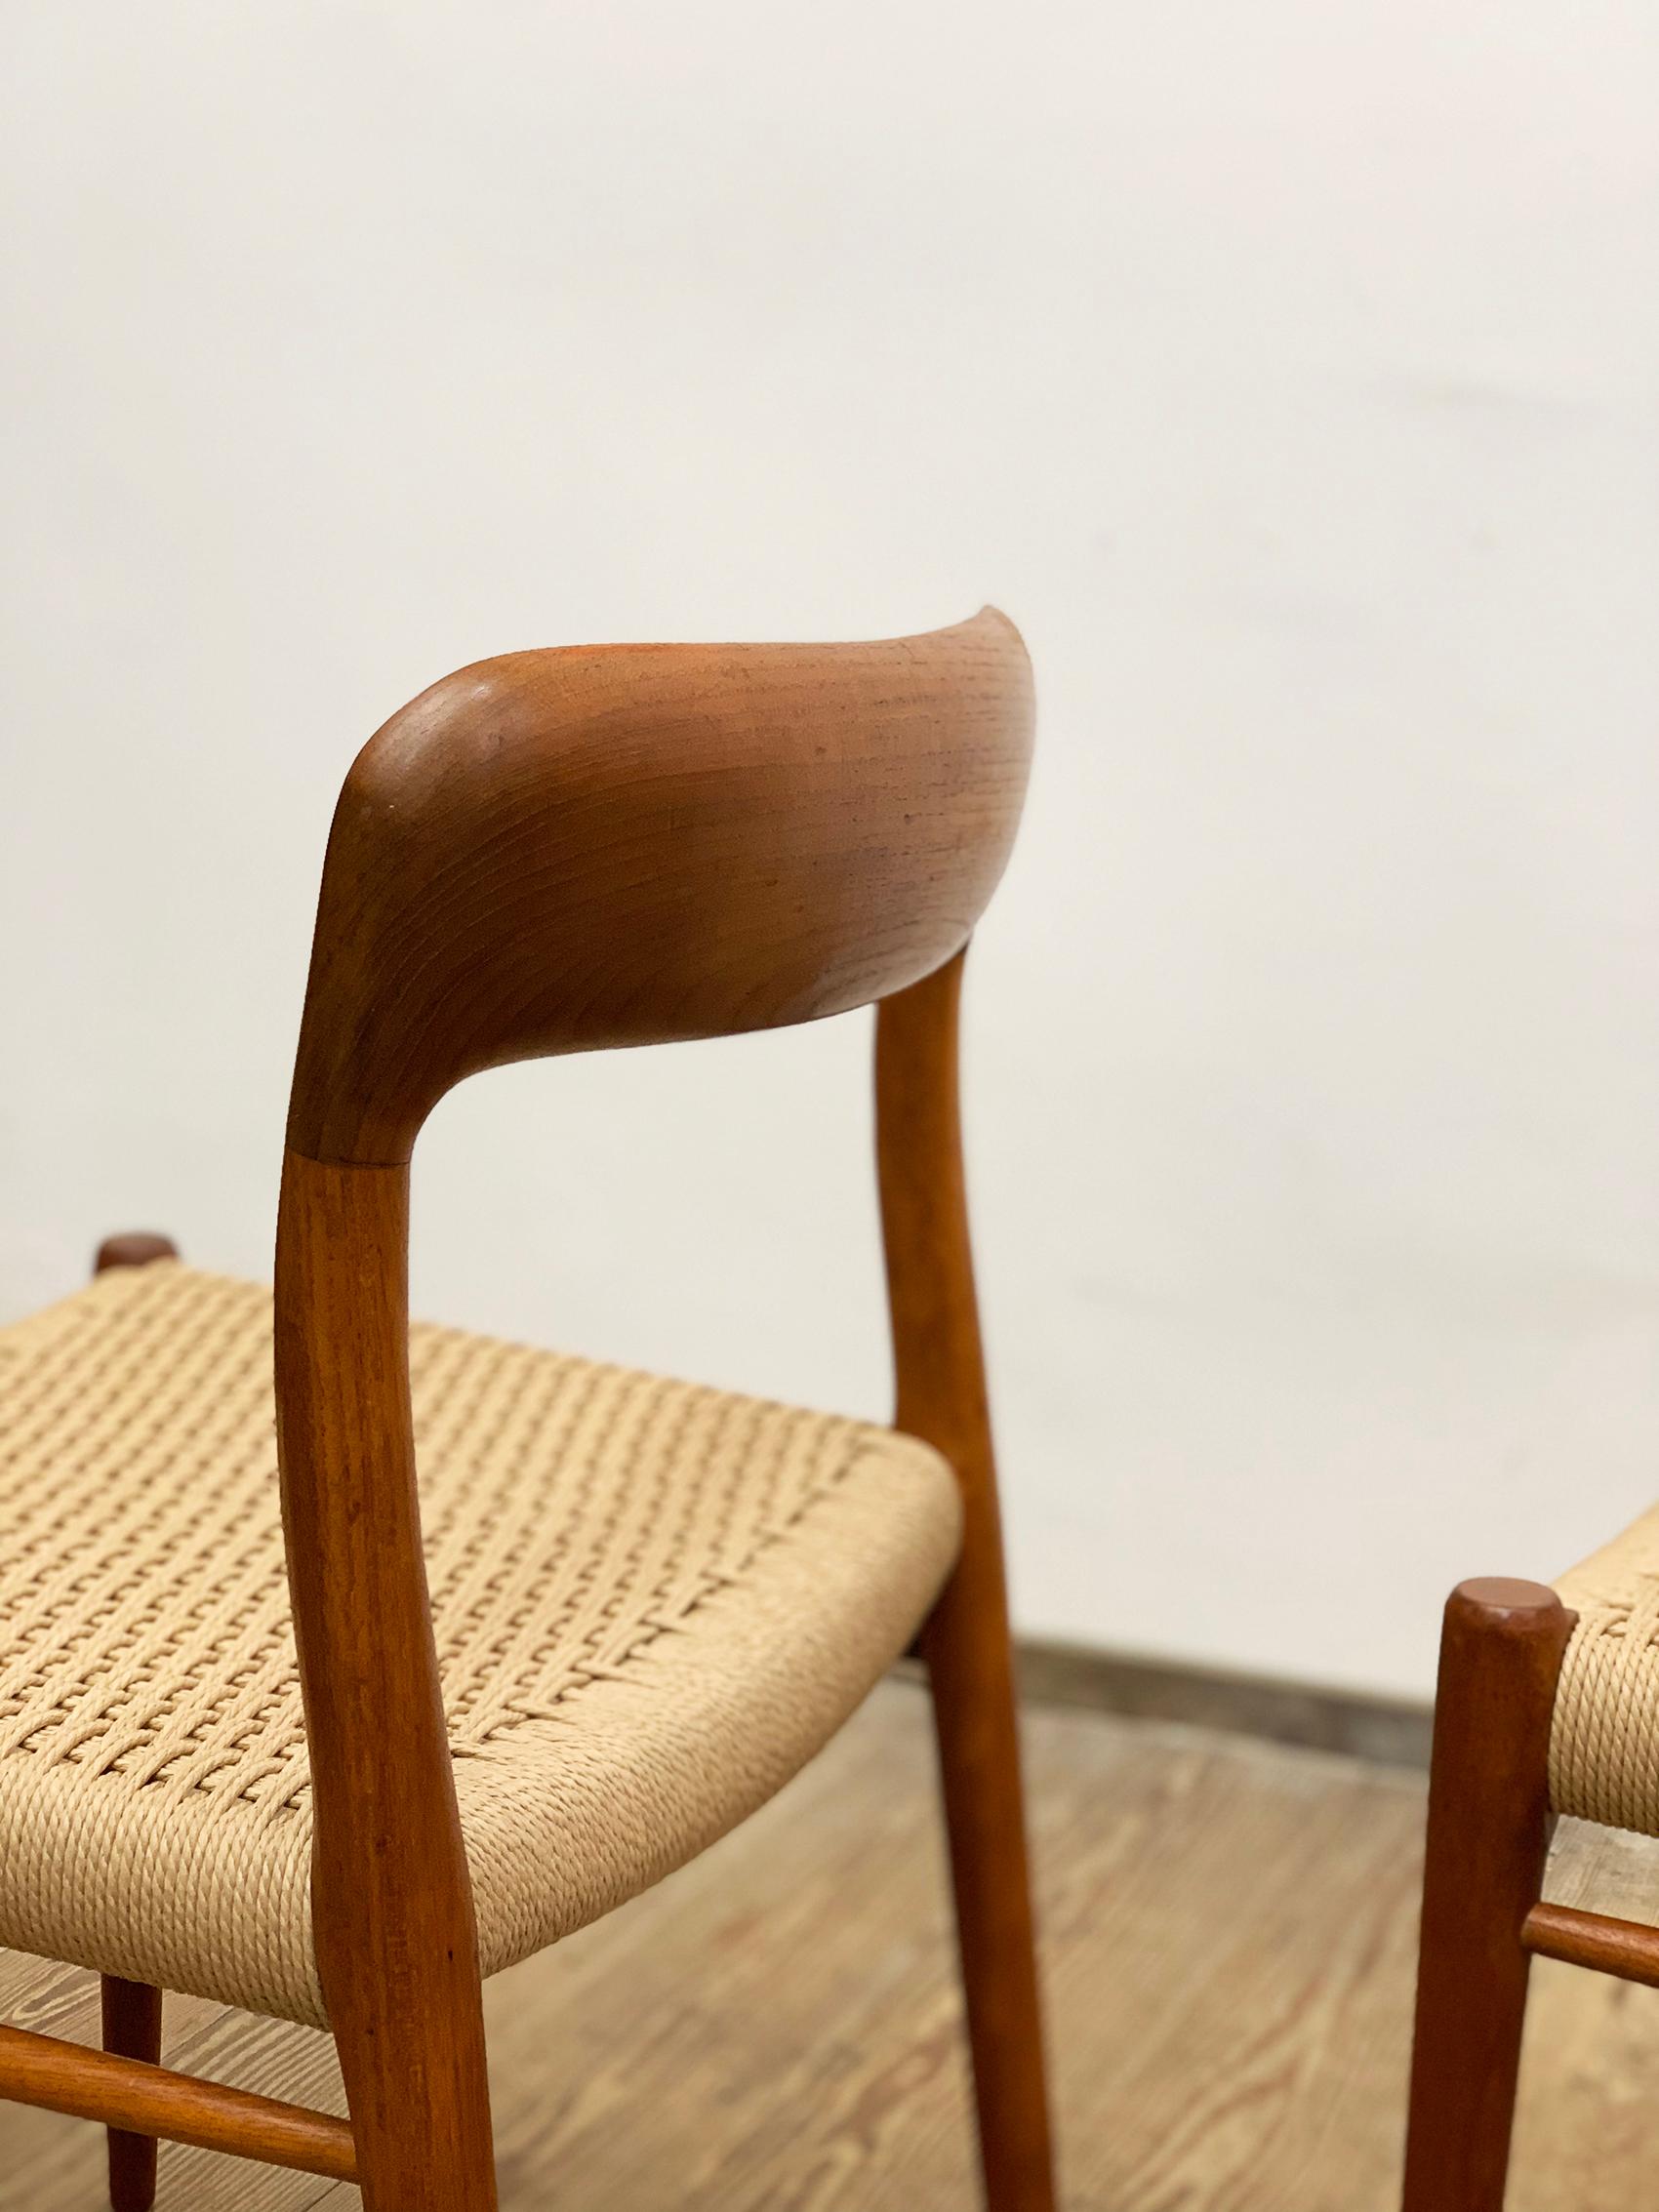 Mid-20th Century Midcentury Teak Dining Chairs #75 by Niels O. Møller for J. L. Moller, Set of 4 For Sale